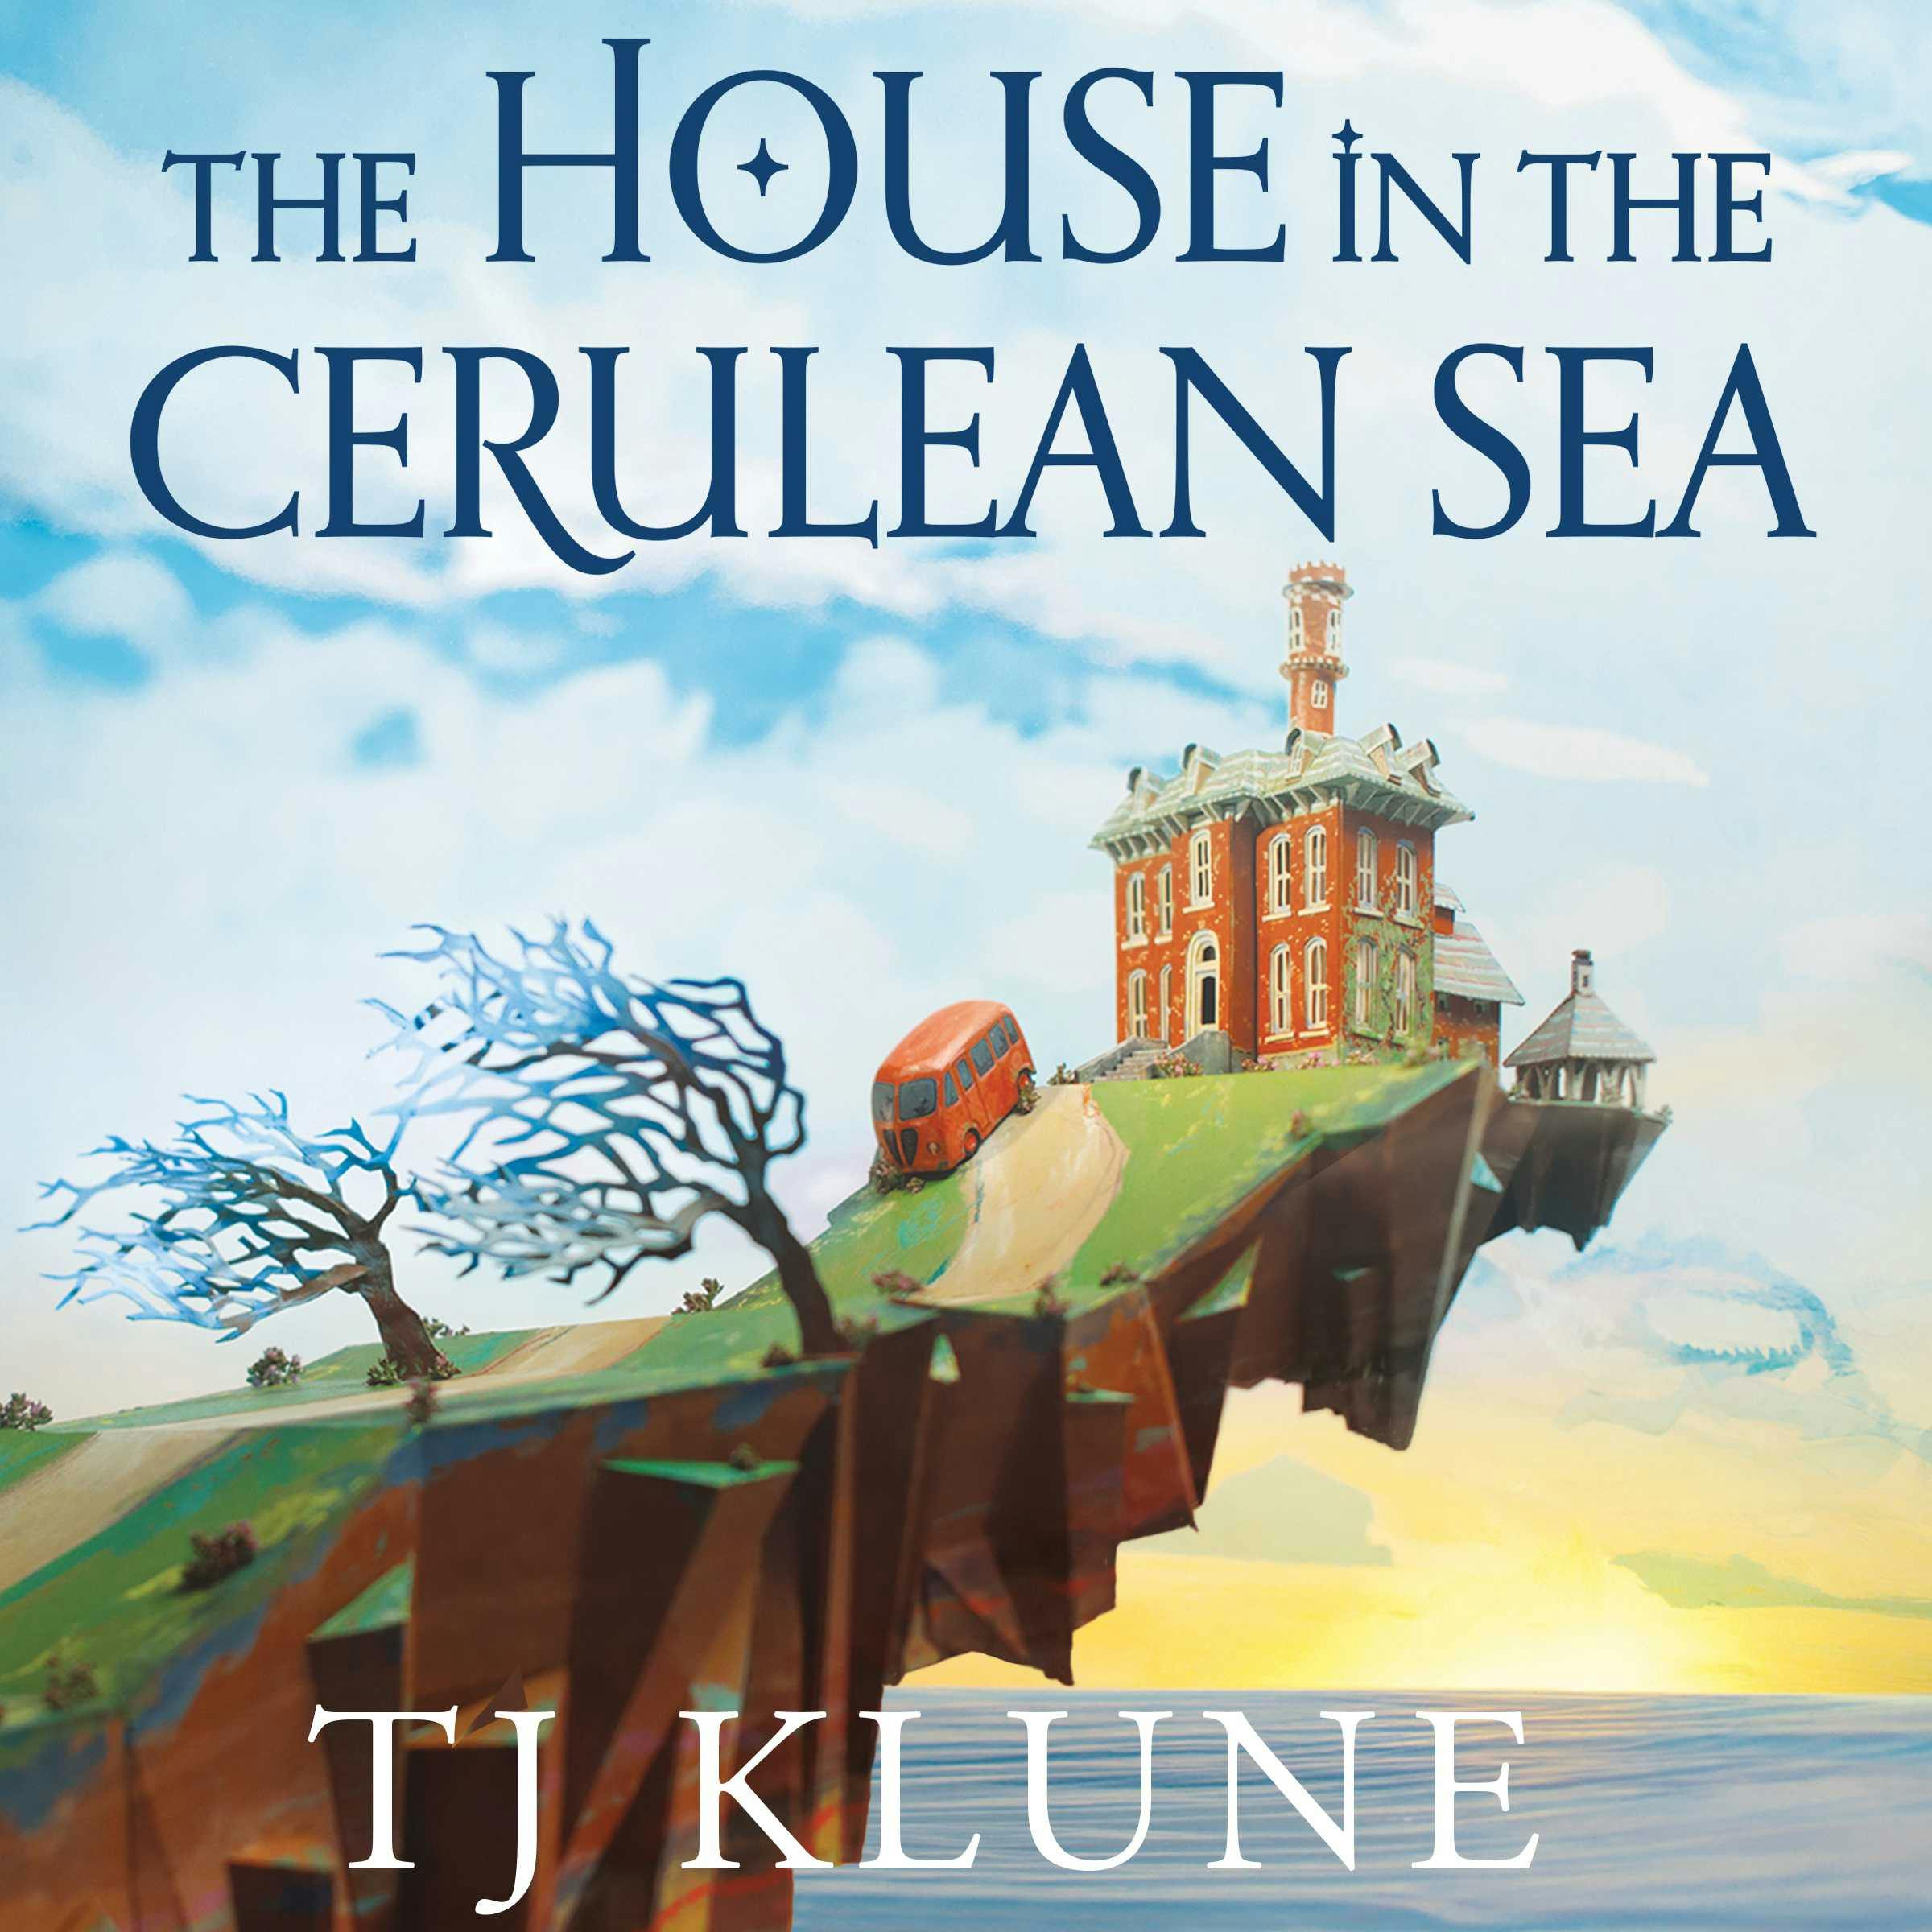 The House in the Cerulean Sea: TikTok made me buy it! - TJ Klune